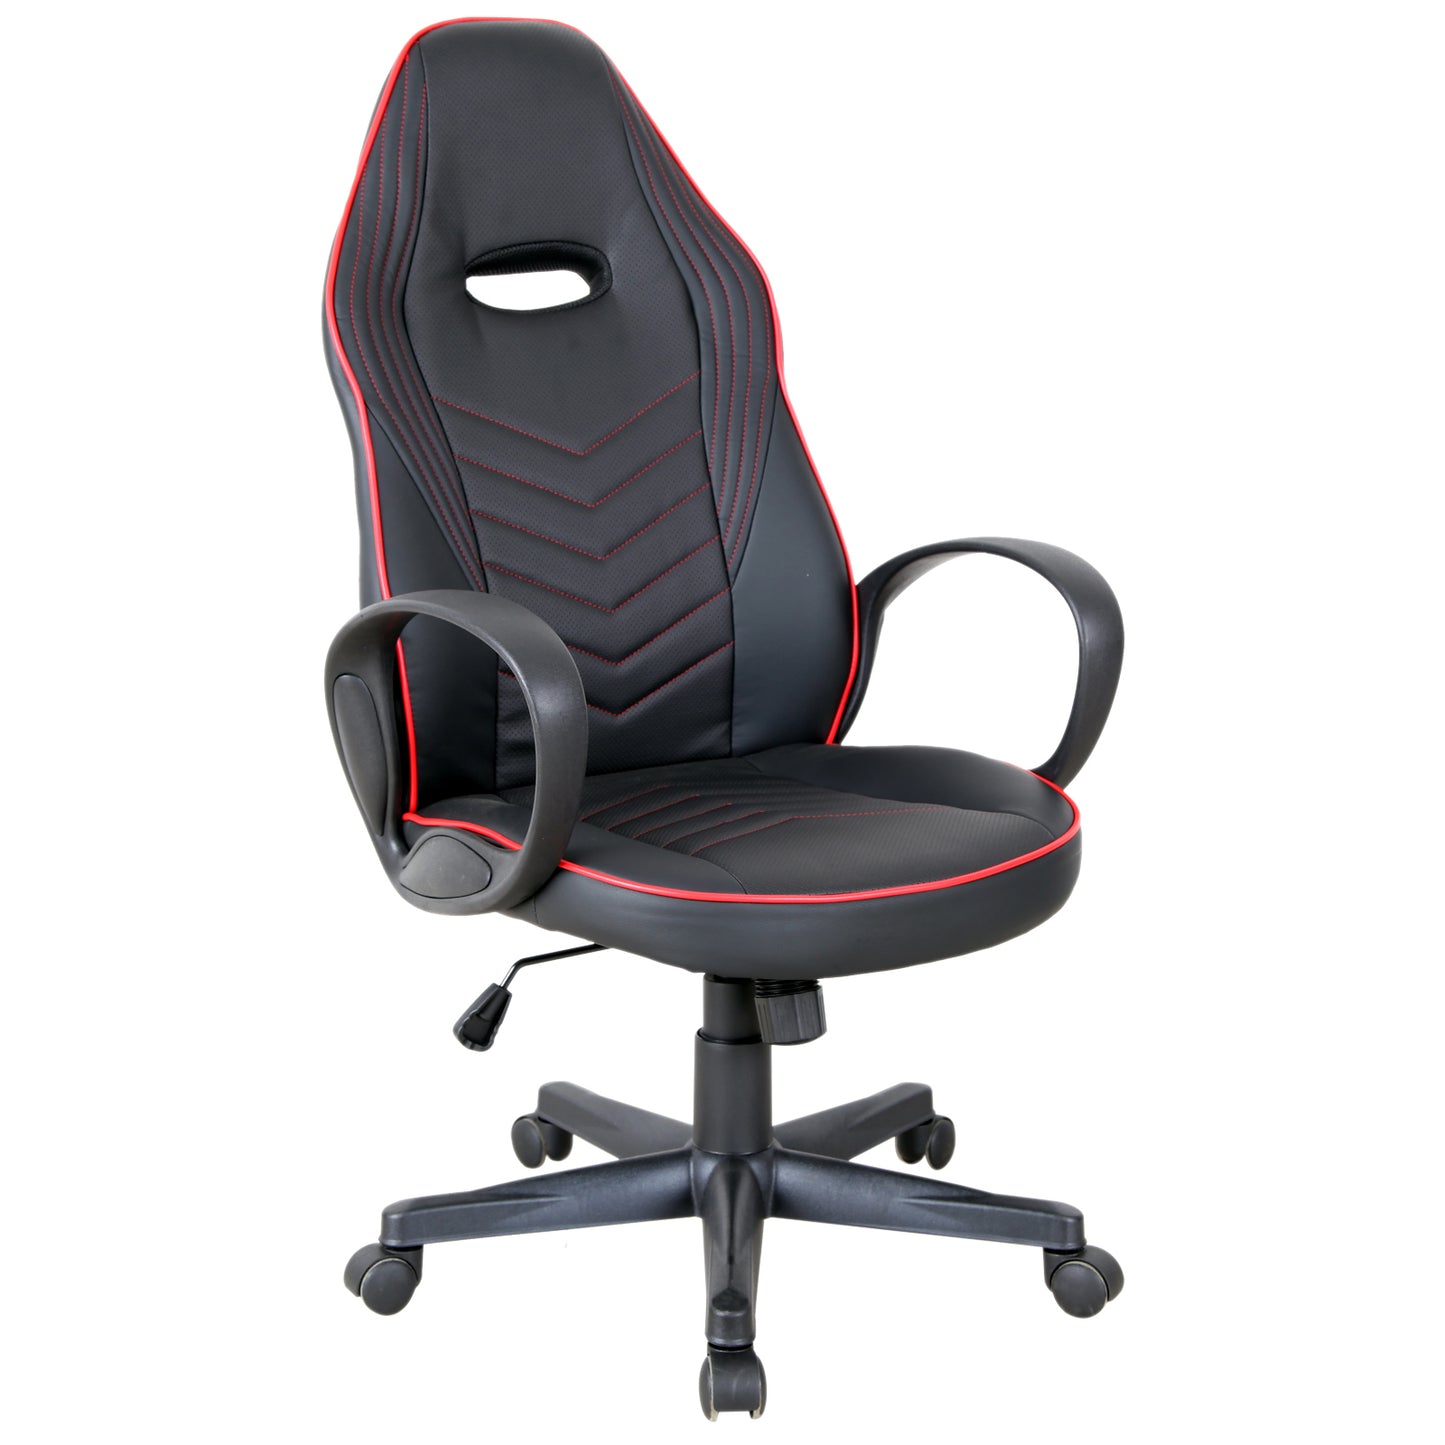 Vinsetto Executive PU Leather Office Gaming Chair Adjustable Height Padded Seat w/ Wheels Red